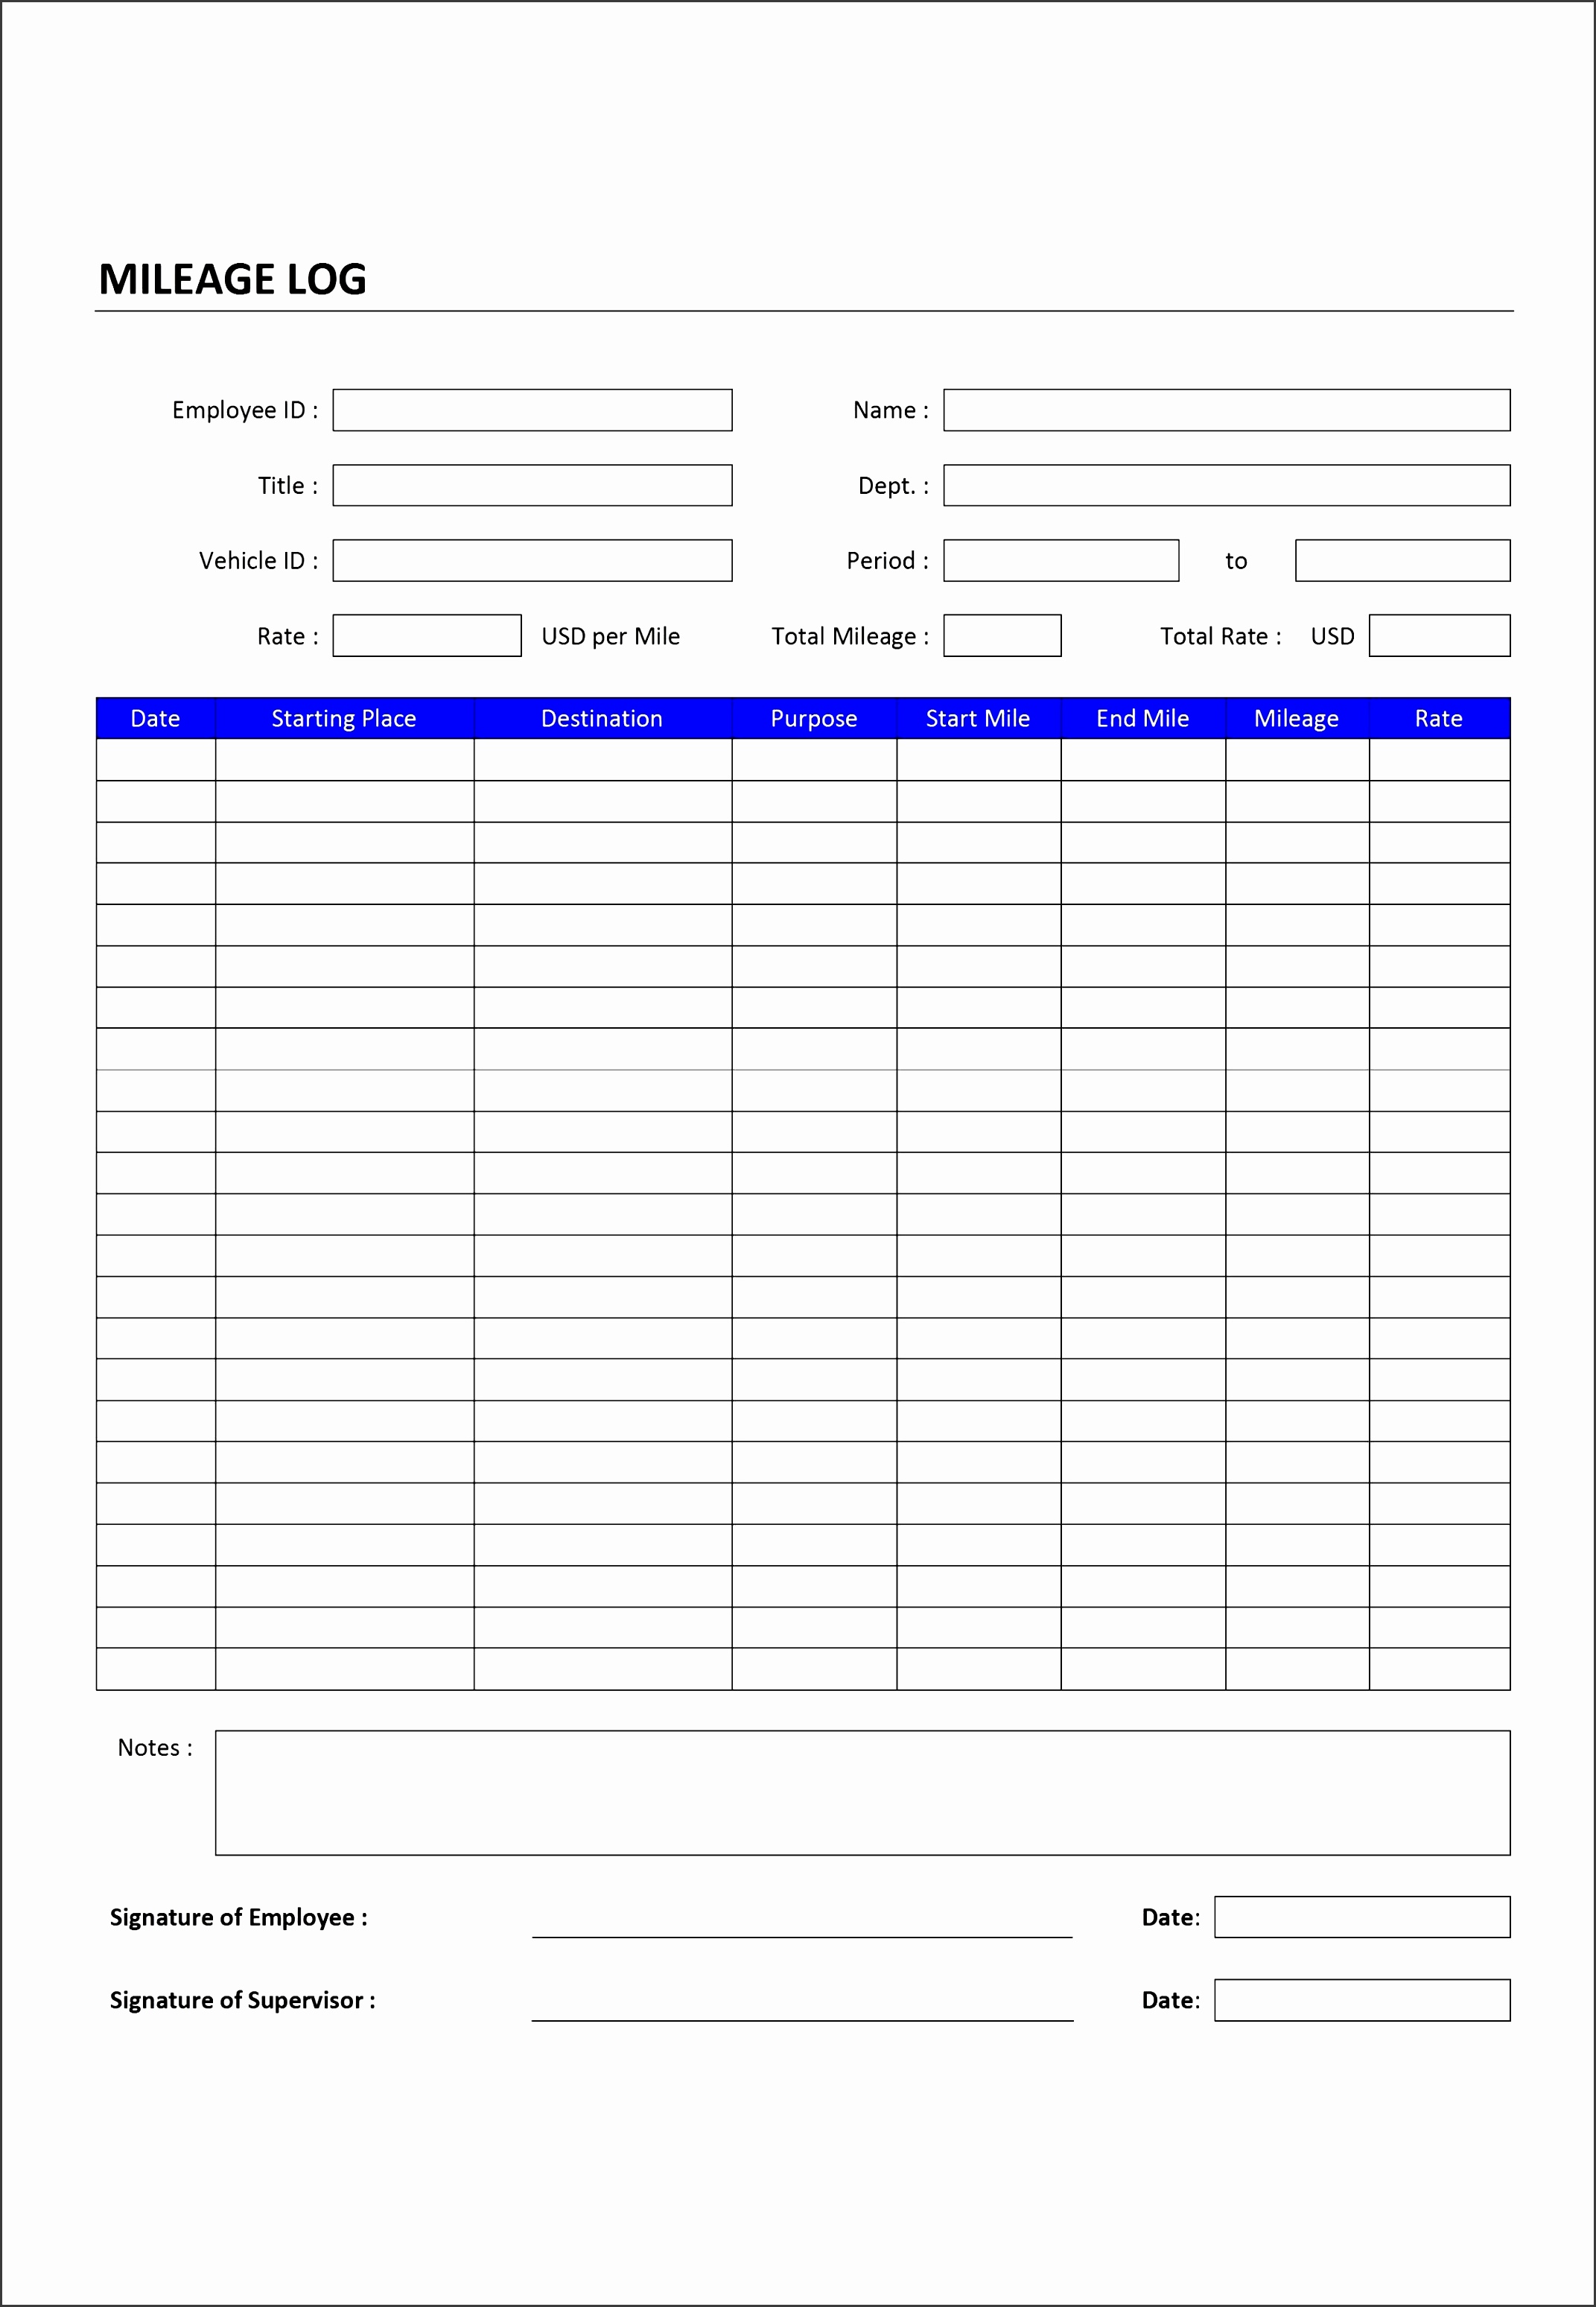 Gallery Pantry Inventory Template Excel Inspirational Petty Cash Log Download at Log